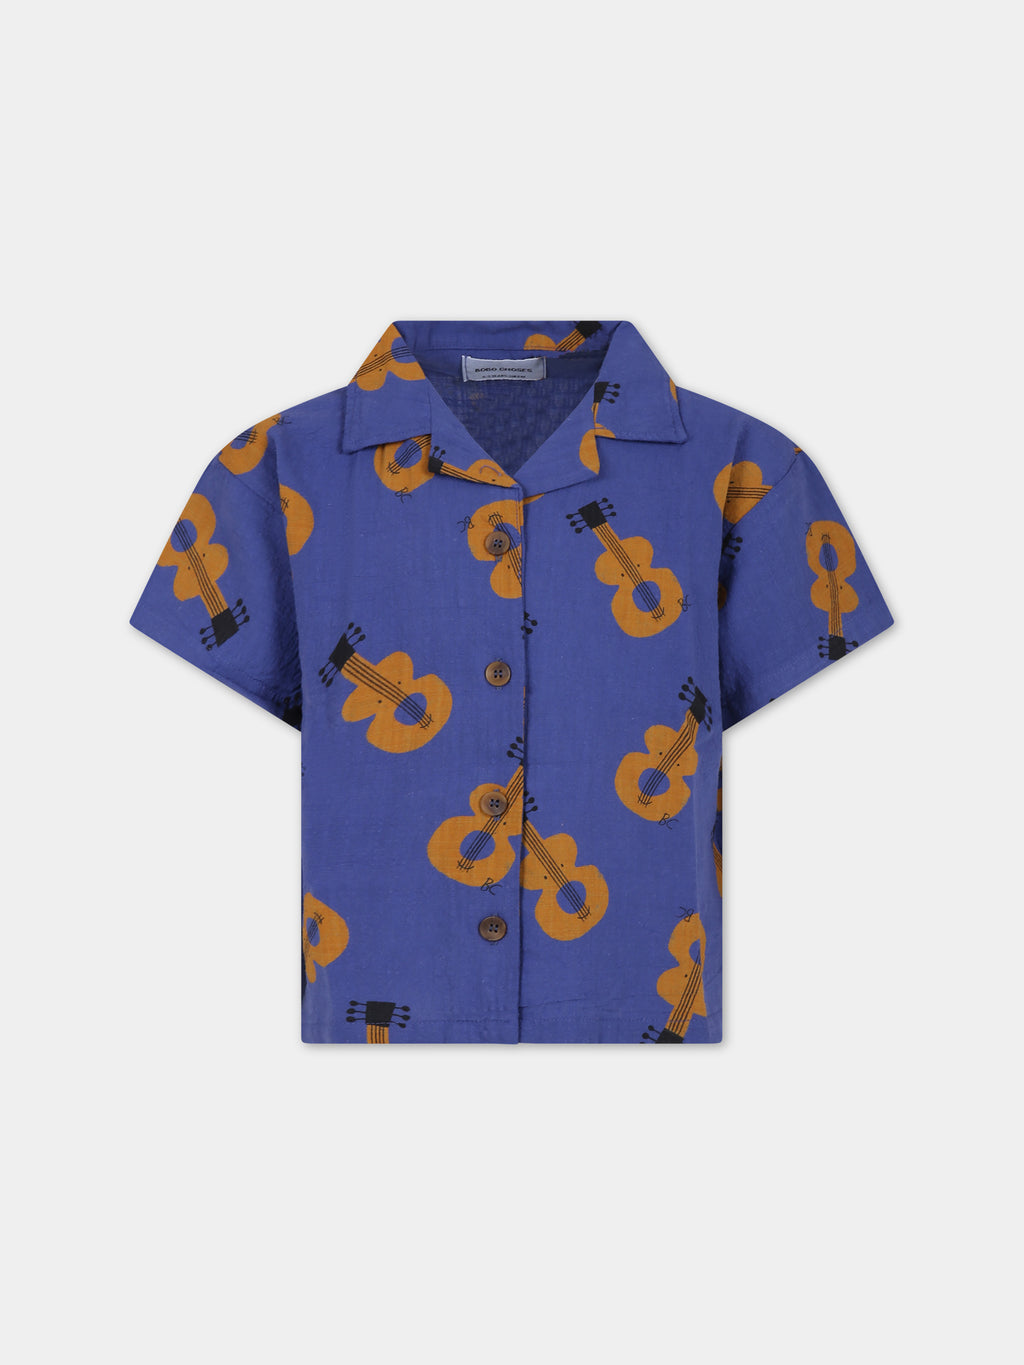 Blue shirt for kids with all-over guitars